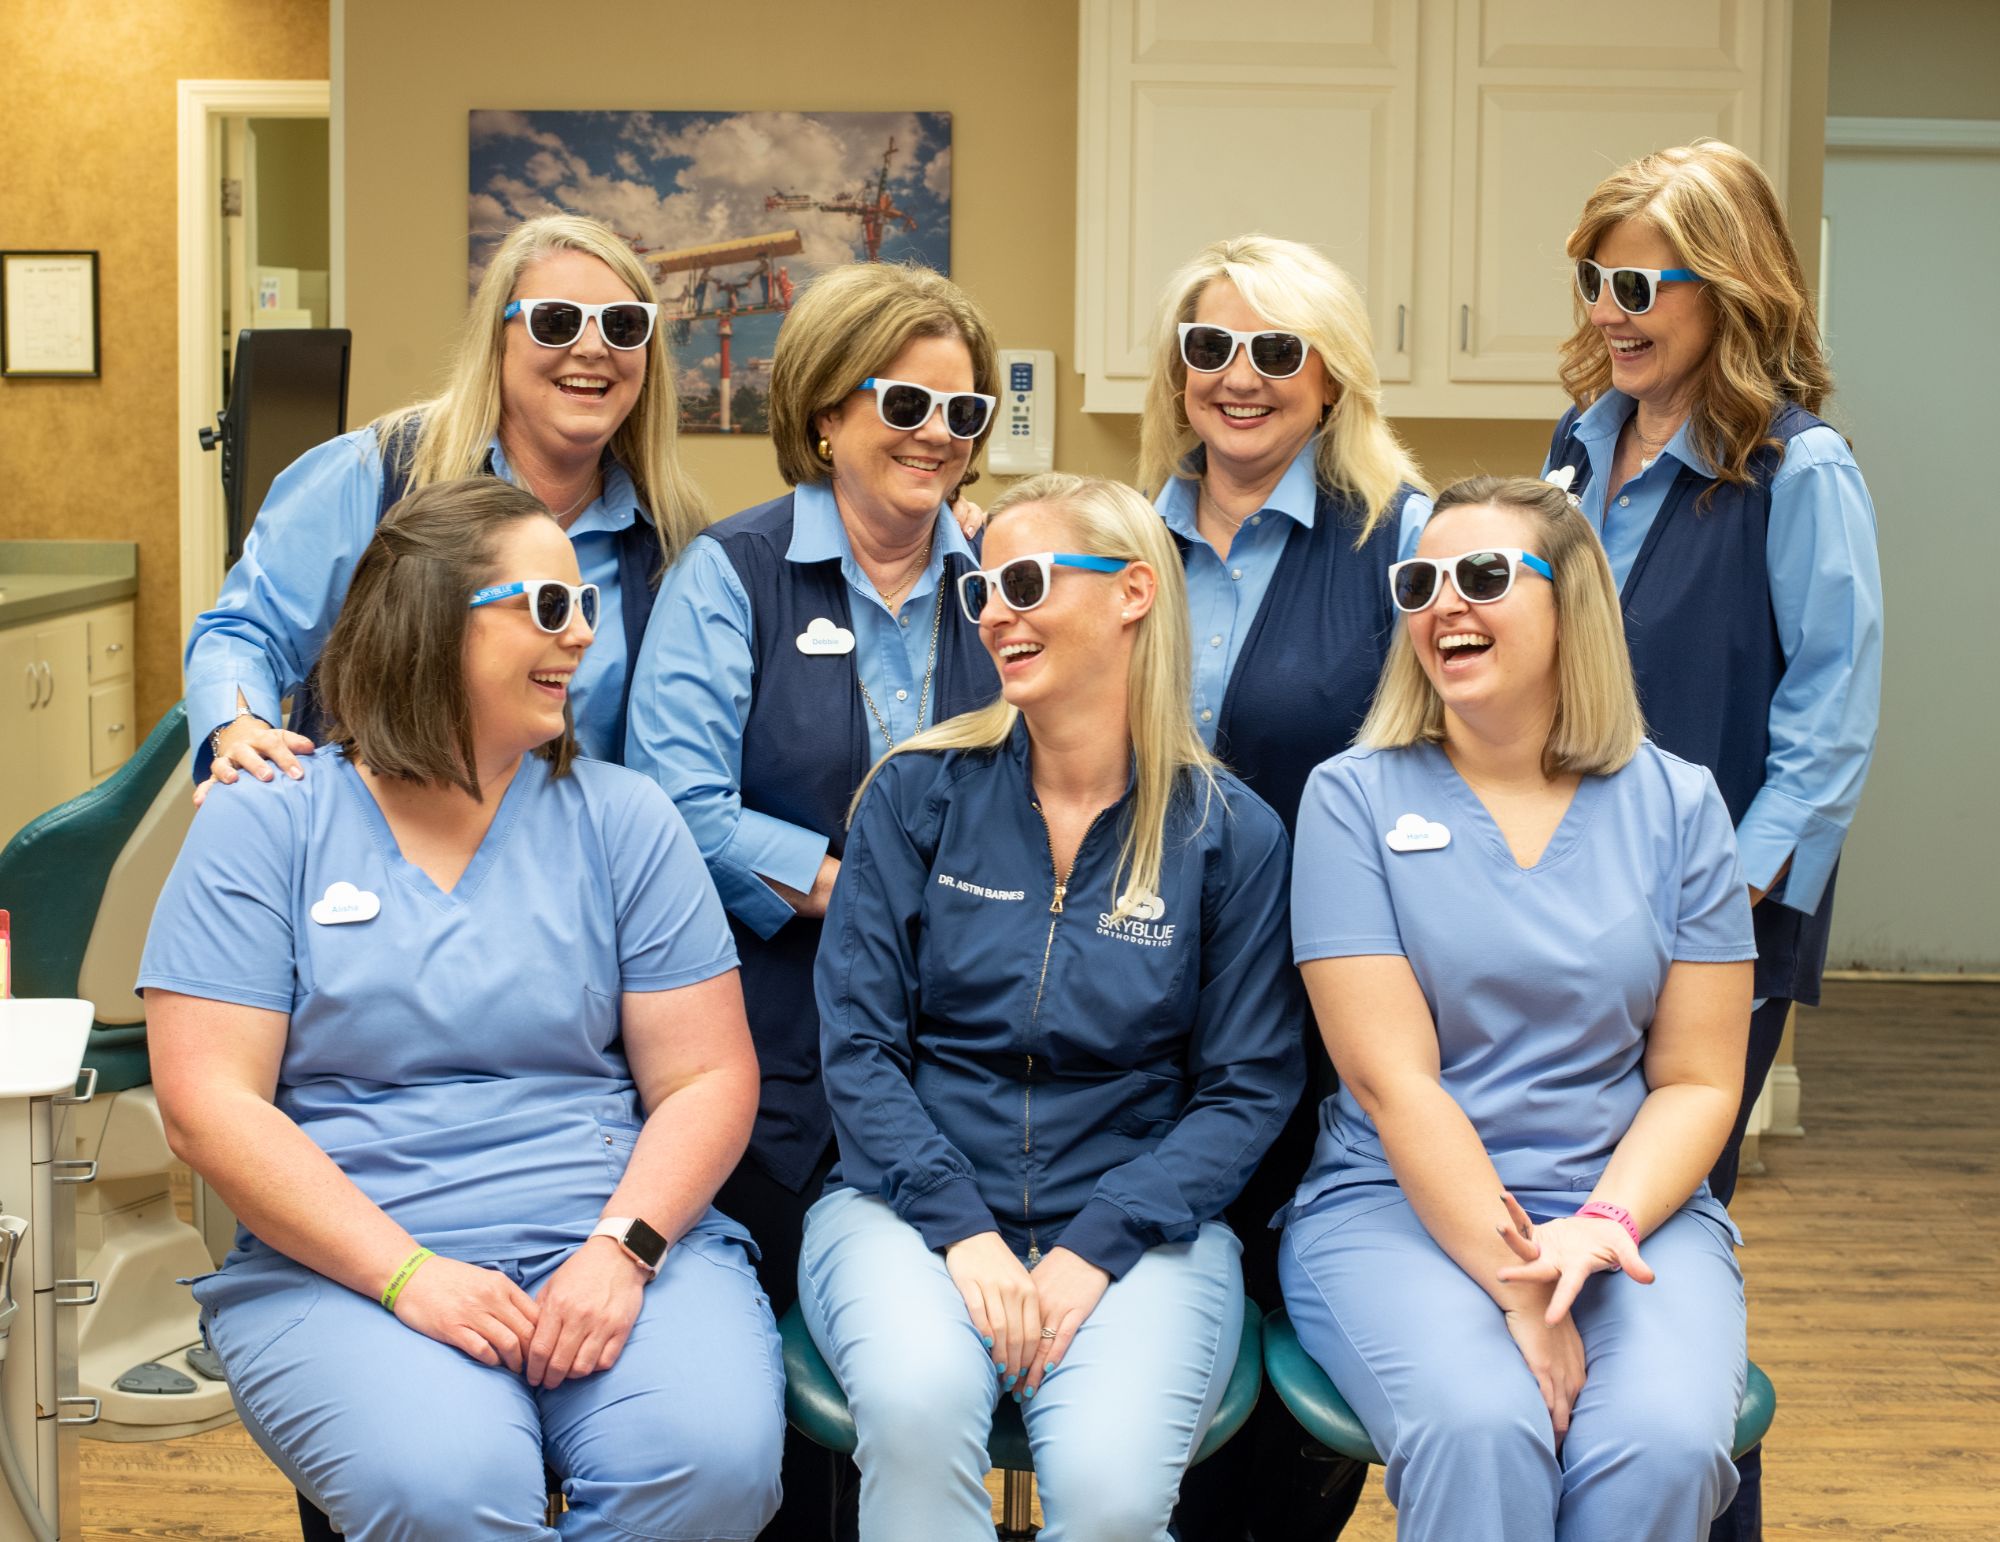 Dr. Barnes and the team at Skyblue Orthodontics smiling